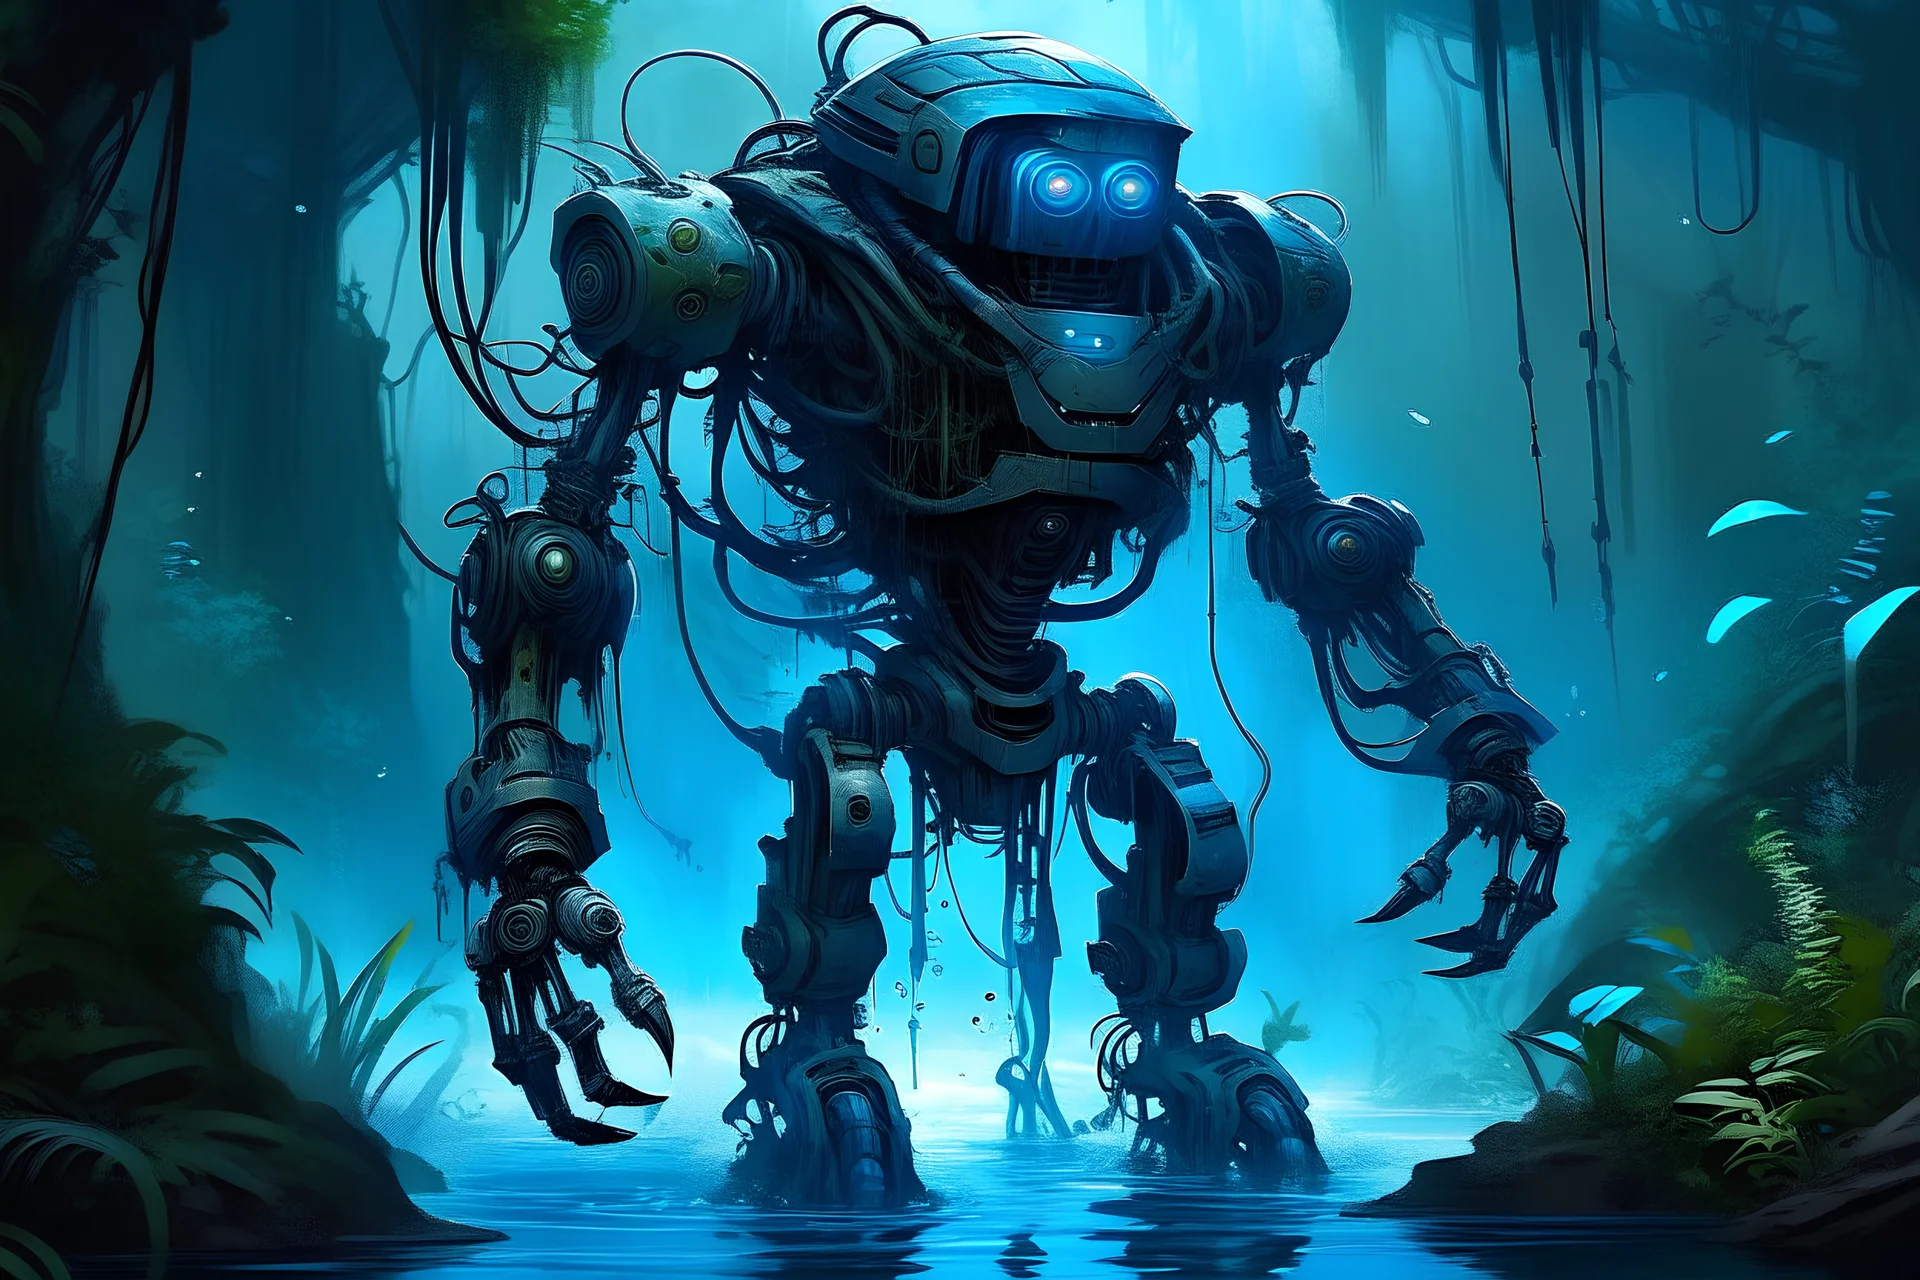 Robot with a weapon made of water. Make the robot look like a hybrid of alien with tentacles and mechanical parts, head is of a human making it look like it's riding the mech suit. With hands growing out of it, eyes have smoke coming out of it with a background of a Jungle with Mayan pyramids in Blue ambiance. make it an oil painting texture.